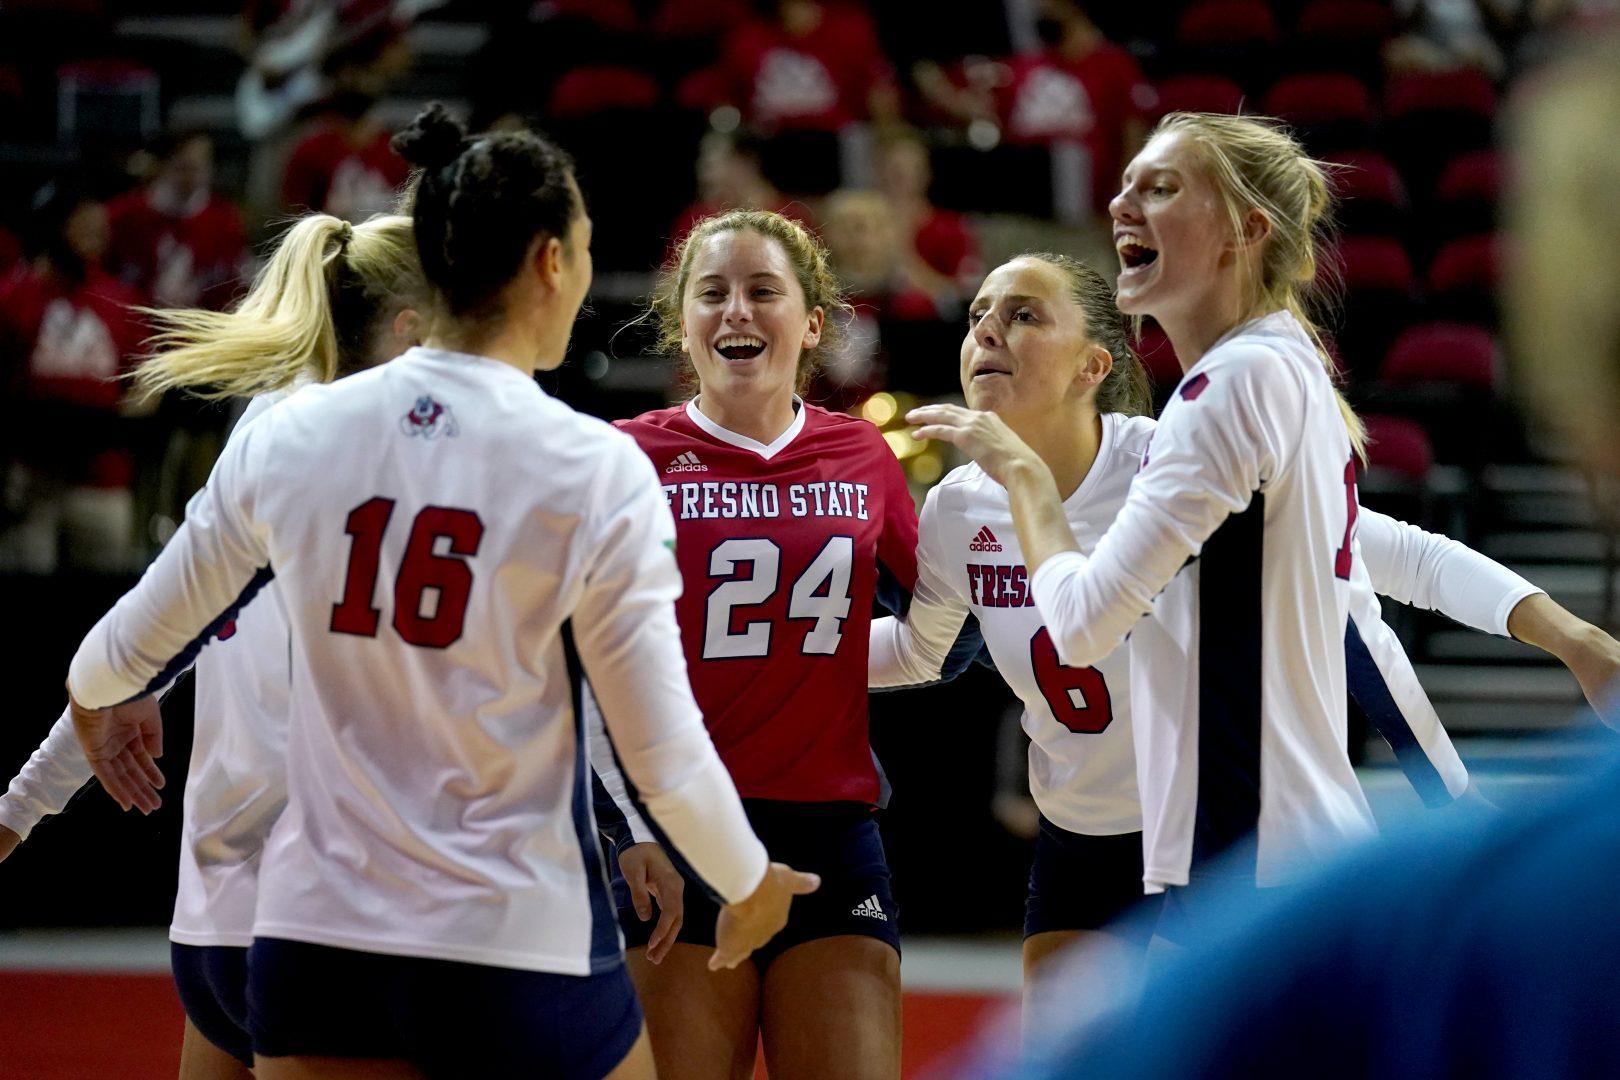 Fresno State volleyball team celebrates victory against Colorado State on Thursday, Sept. 30, 2021, at the Save Mart Center. (Courtesy of Fresno State Athletics)